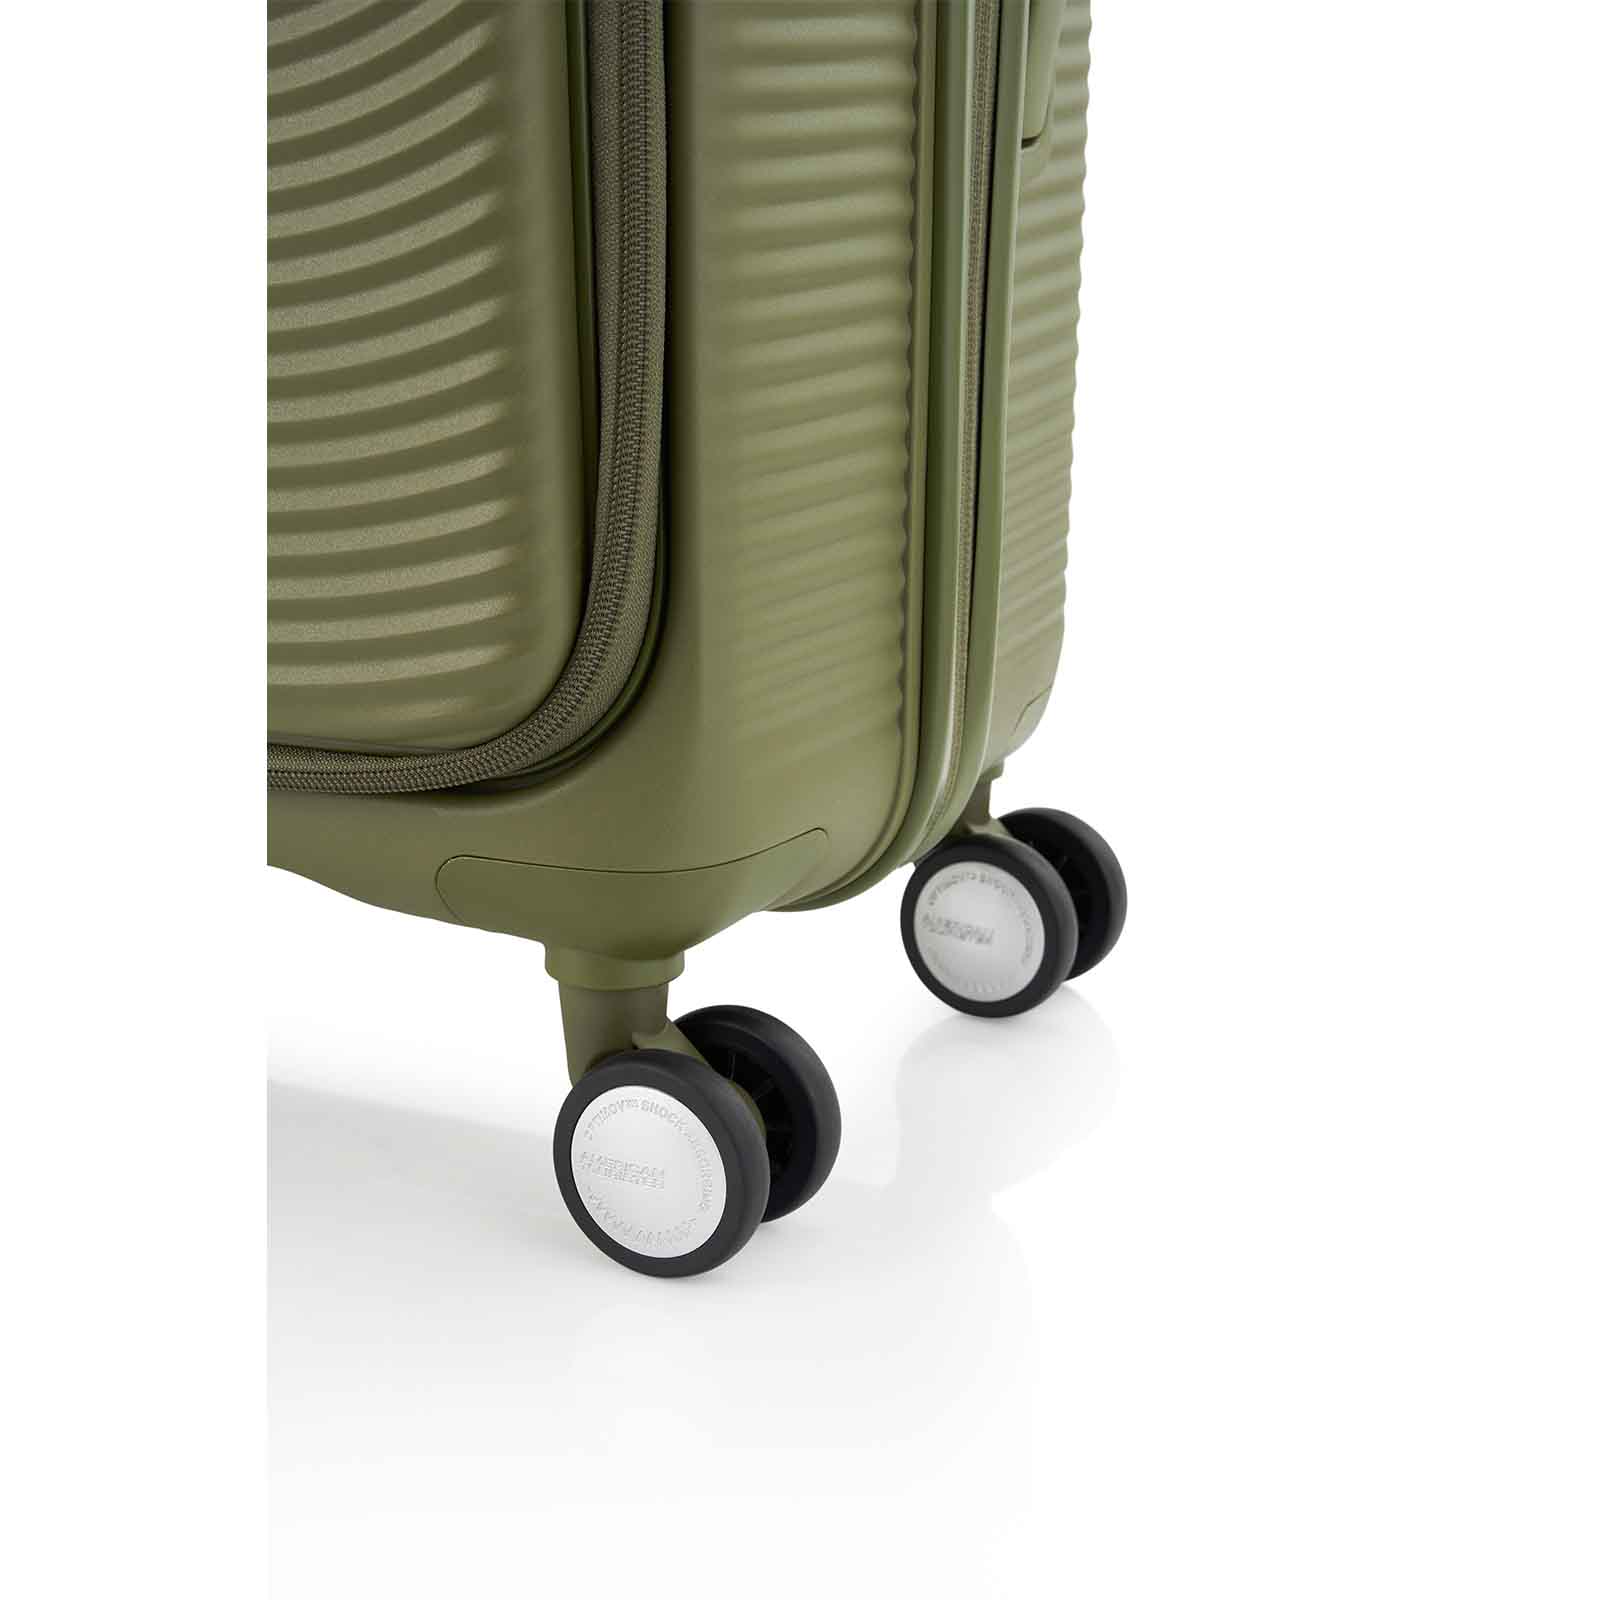 American-Tourister-Curio-Book-Opening-55cm-Carry-On-Suitcase-Khaki-Wheels